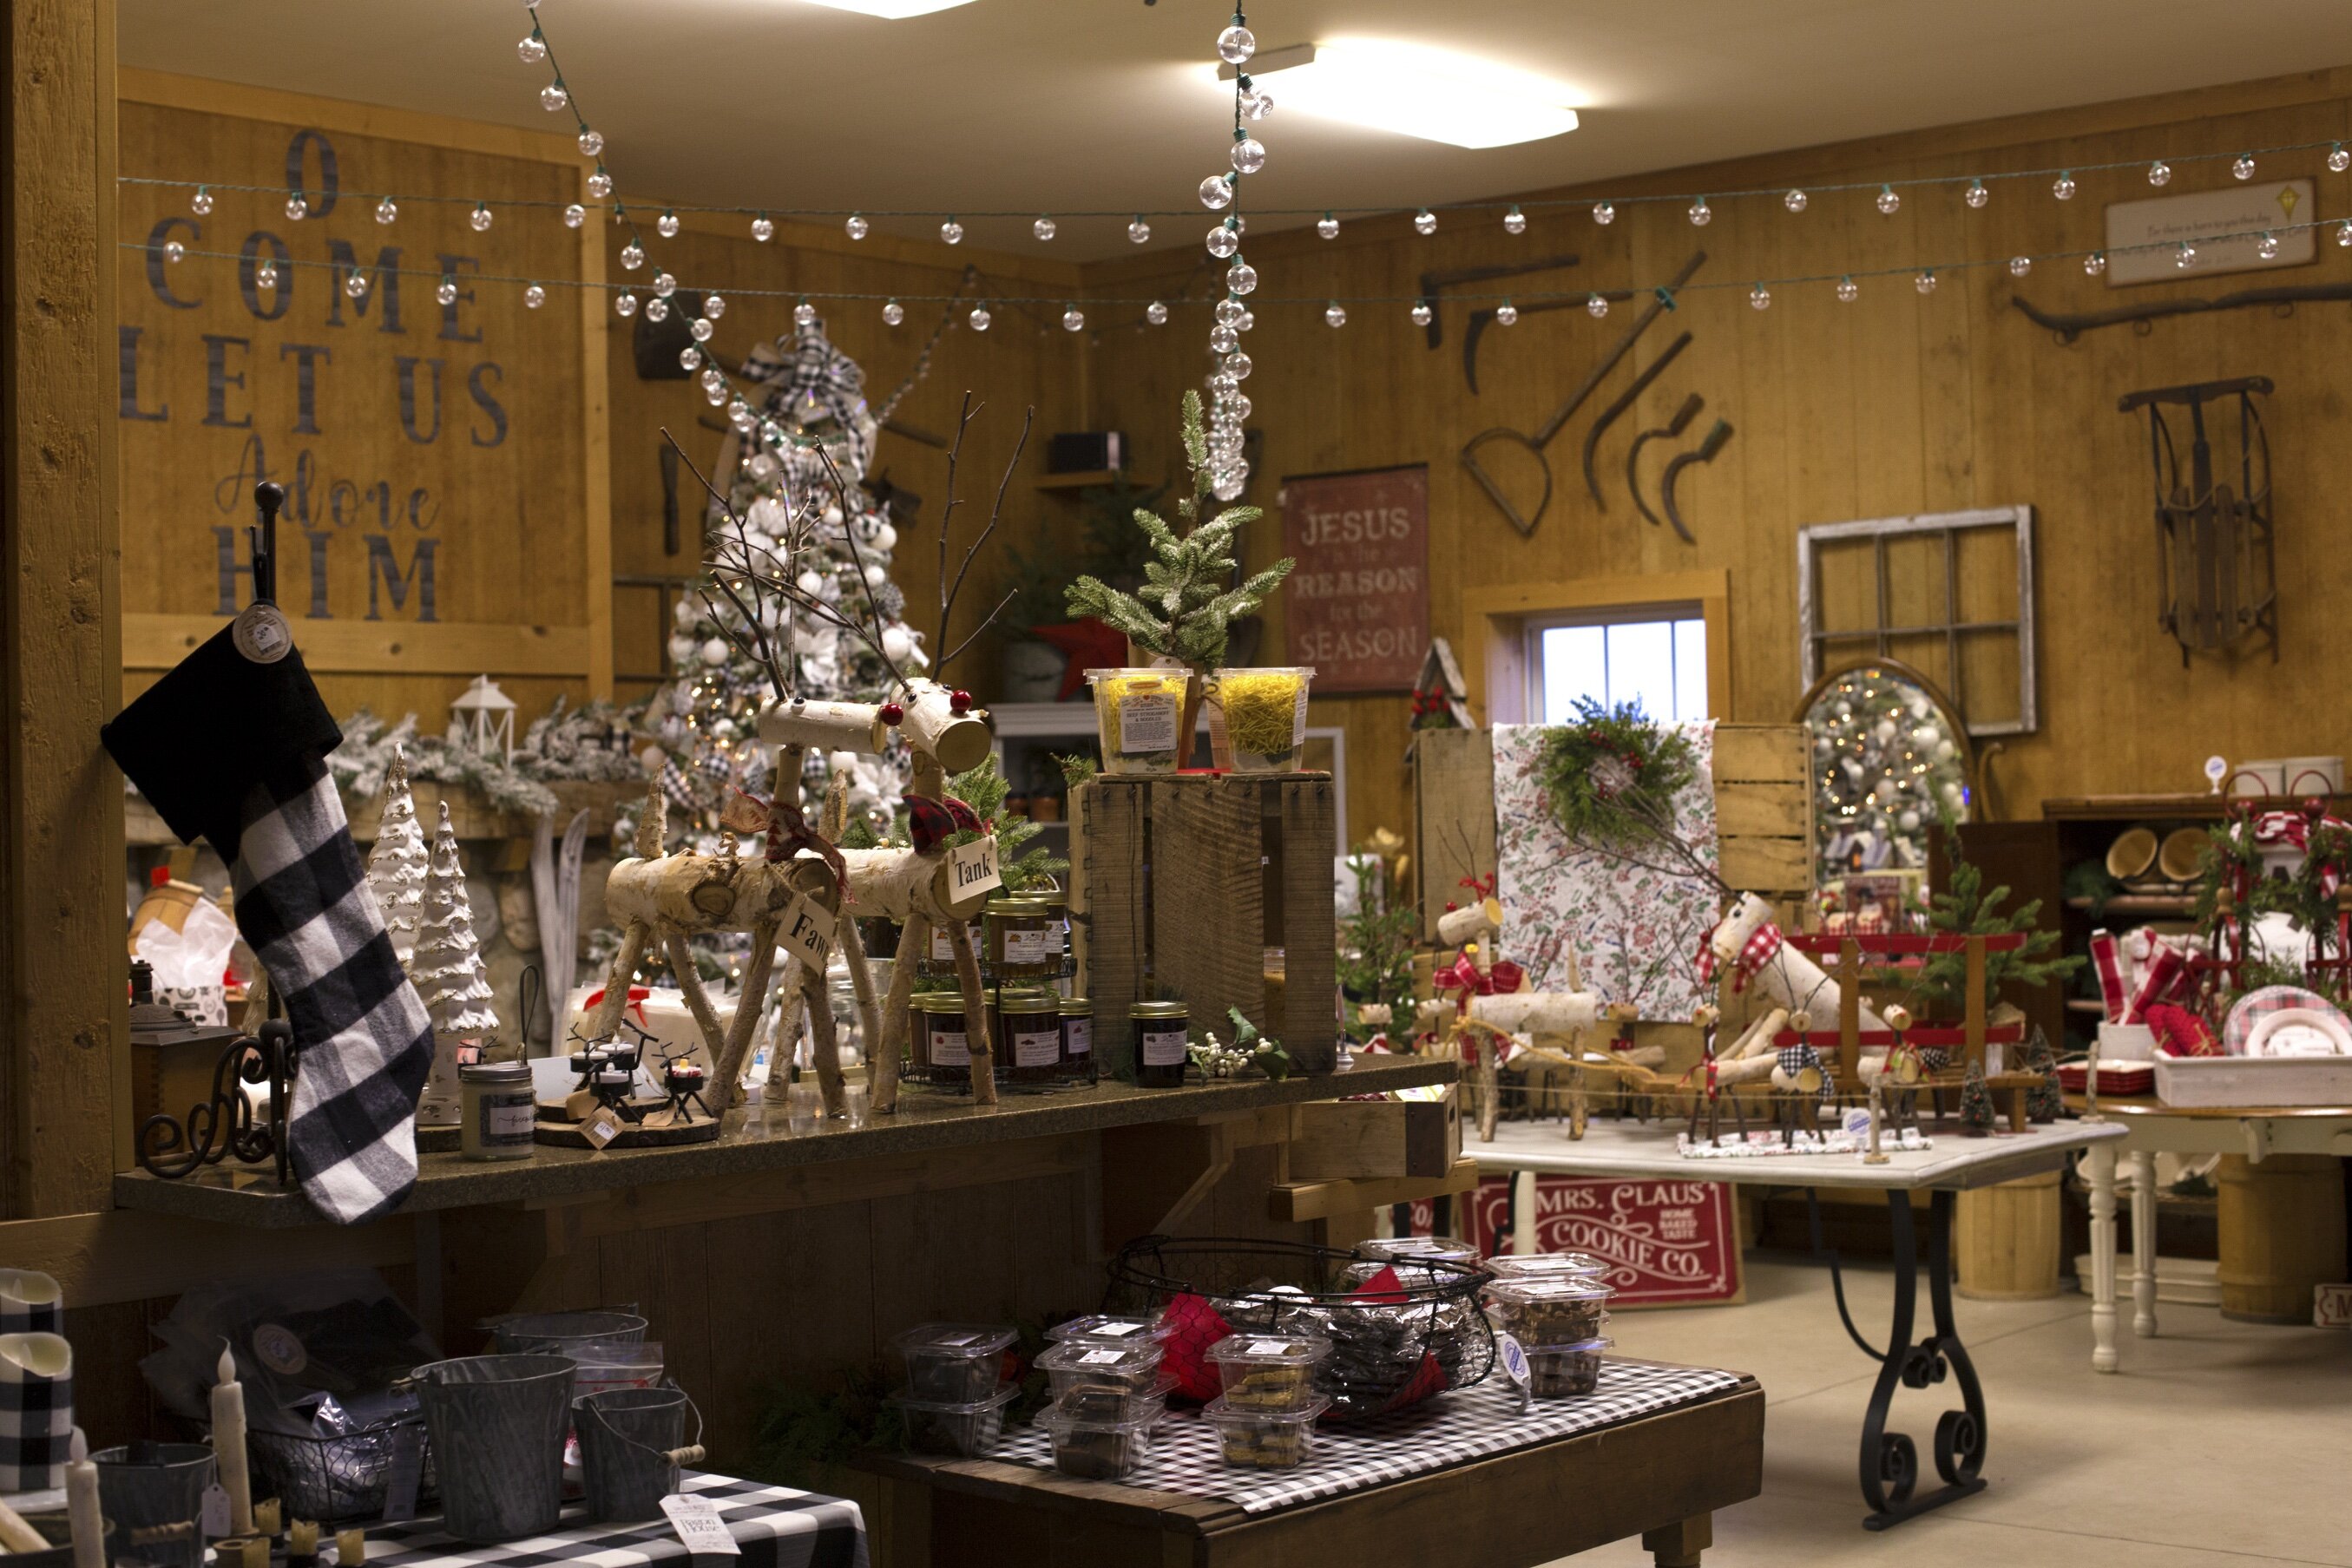 Country Christmas Tree Farm's gift shop offers a variety of products made by Michigan vendors.